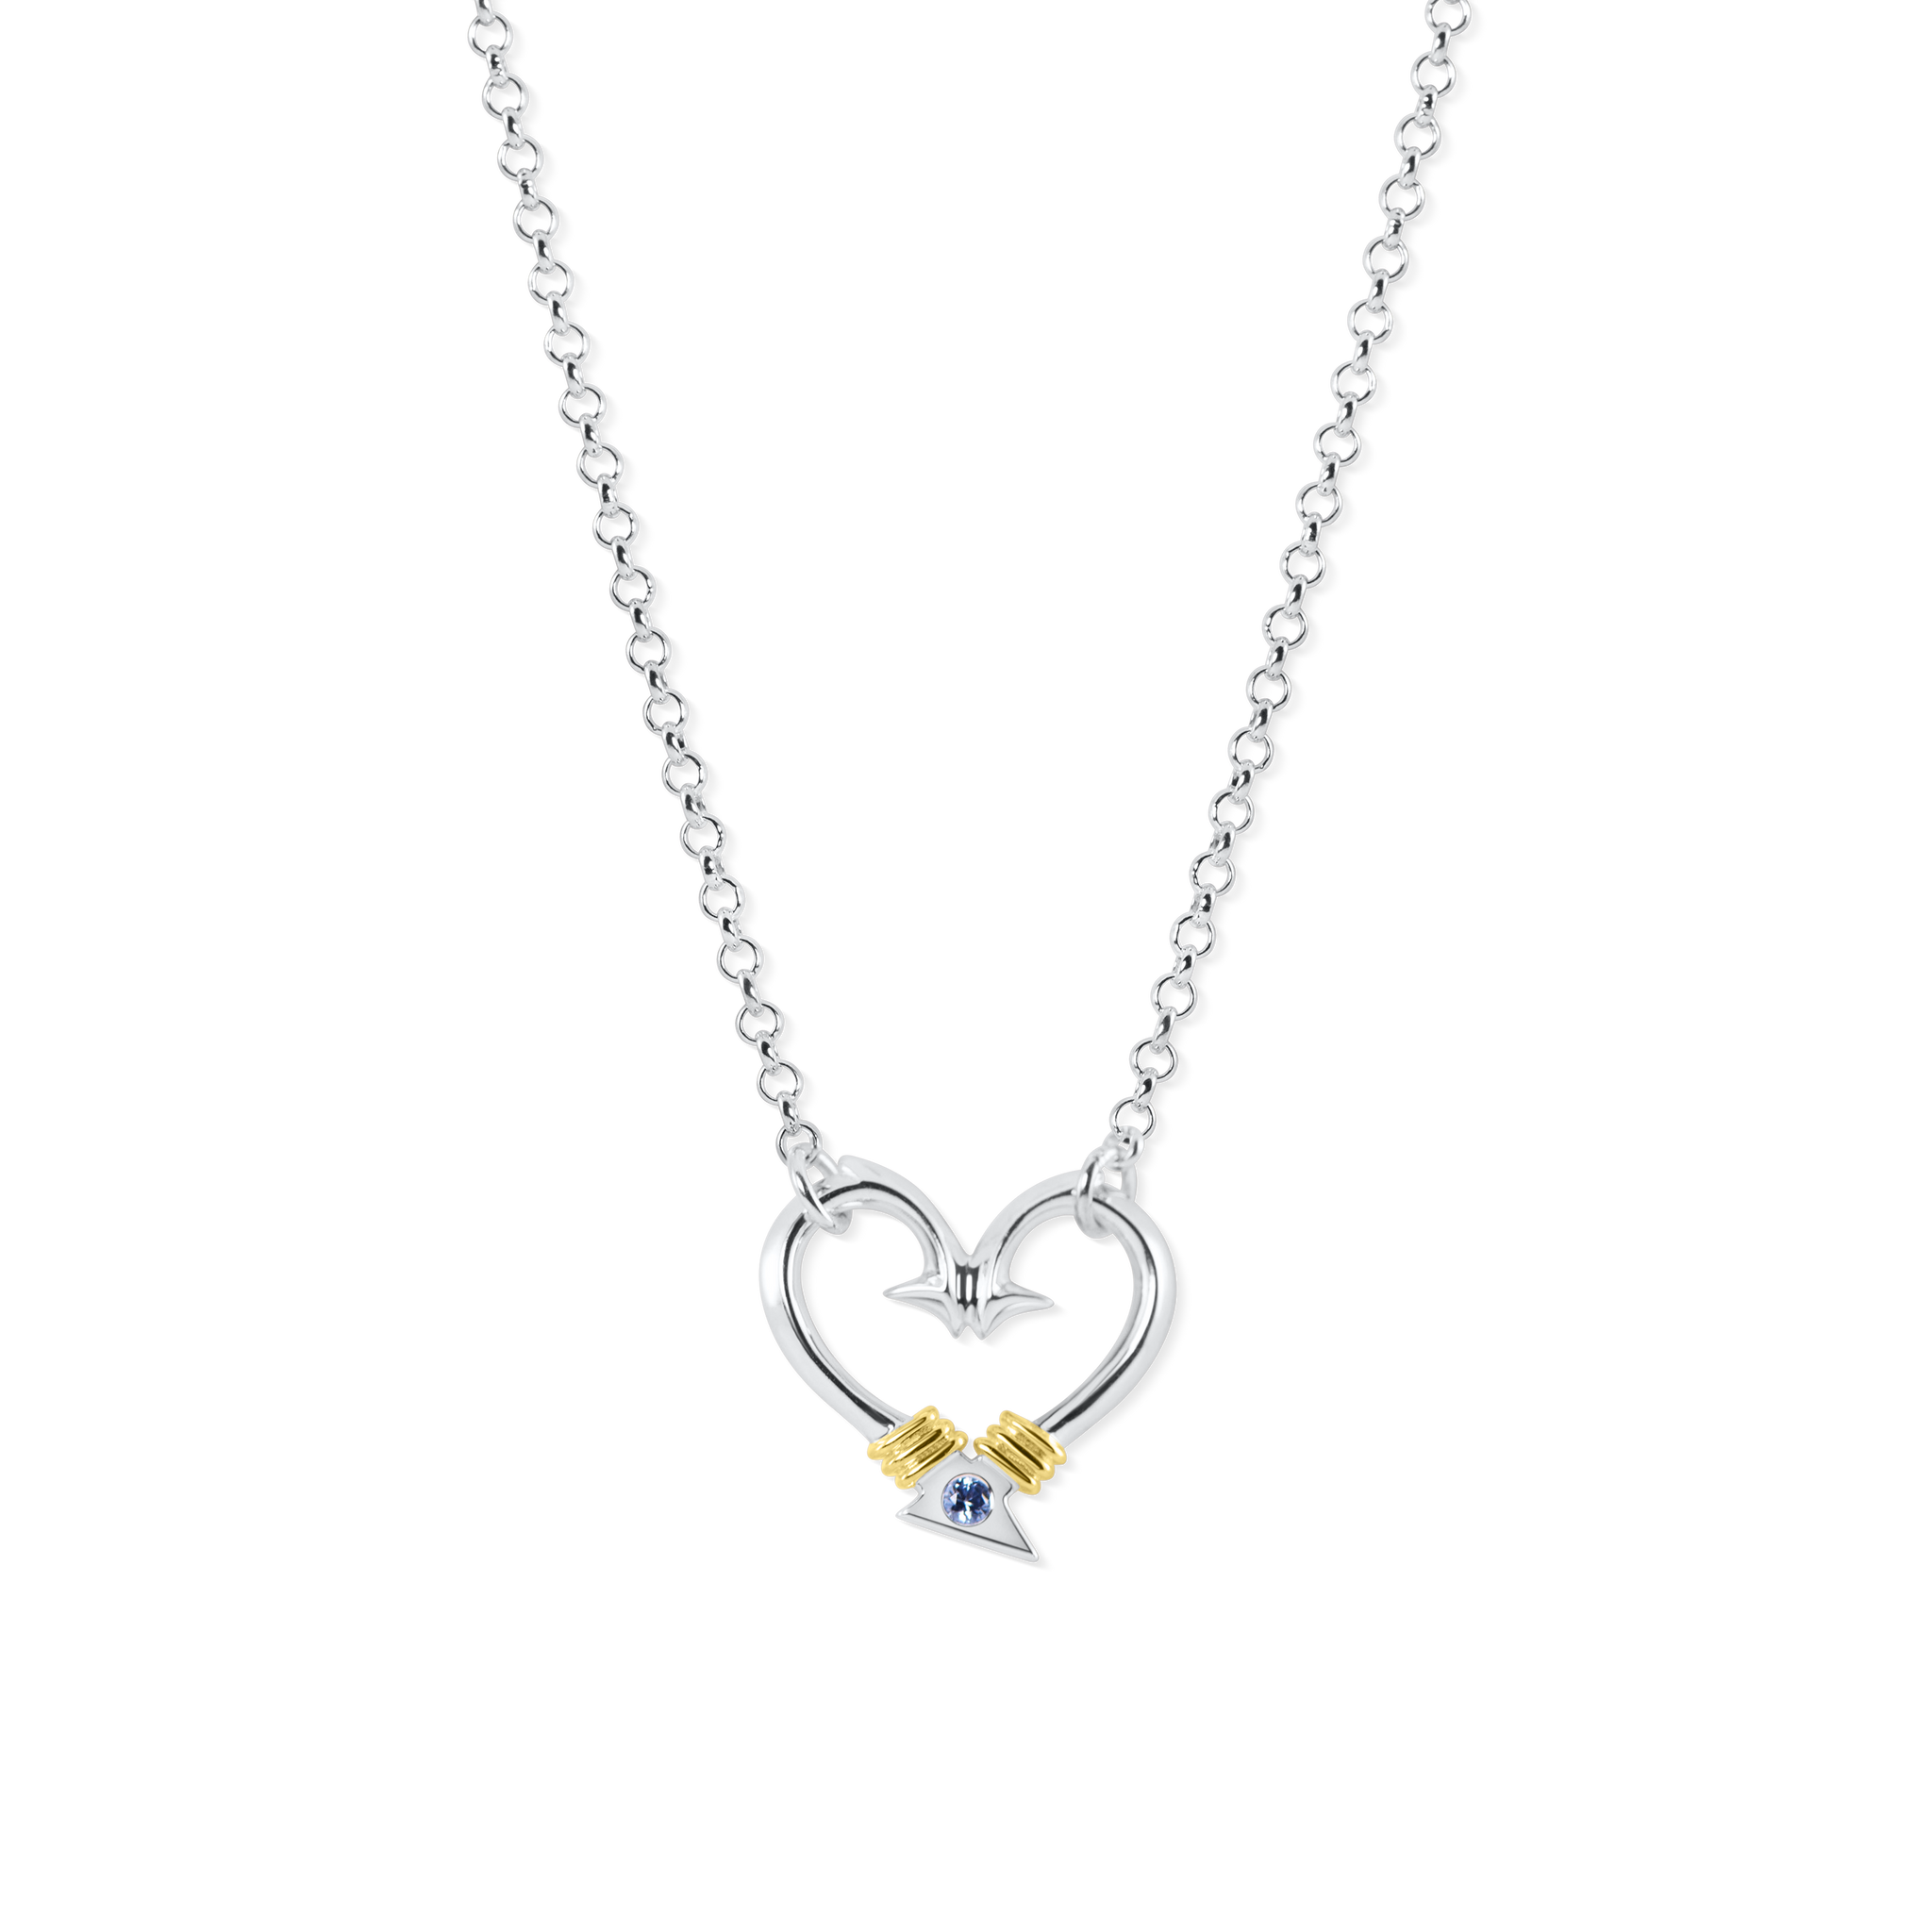 Hook Heart Necklace (Small)